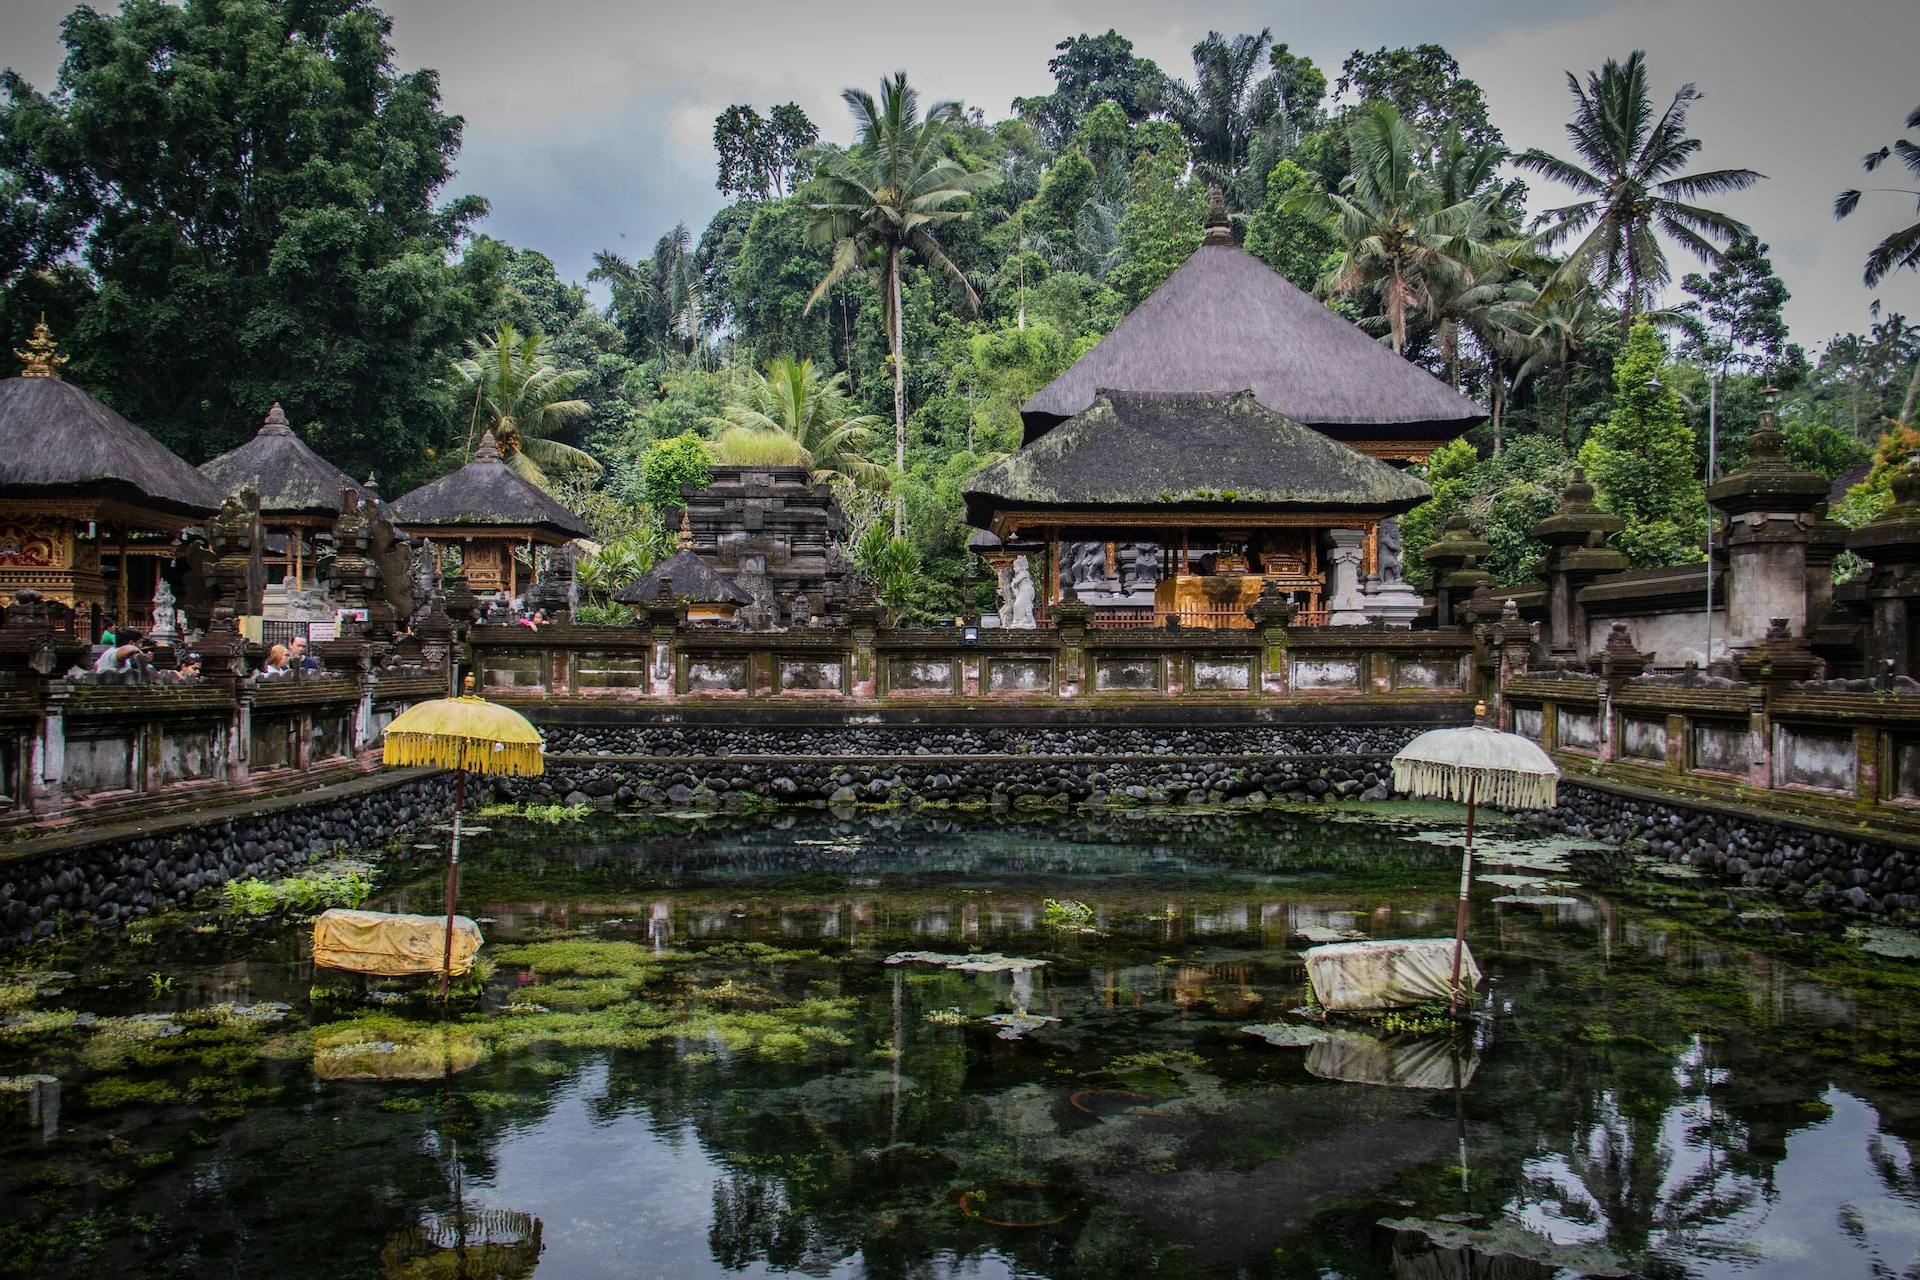 See Bali's most famous water temple at Pura Tirta Empul water temple